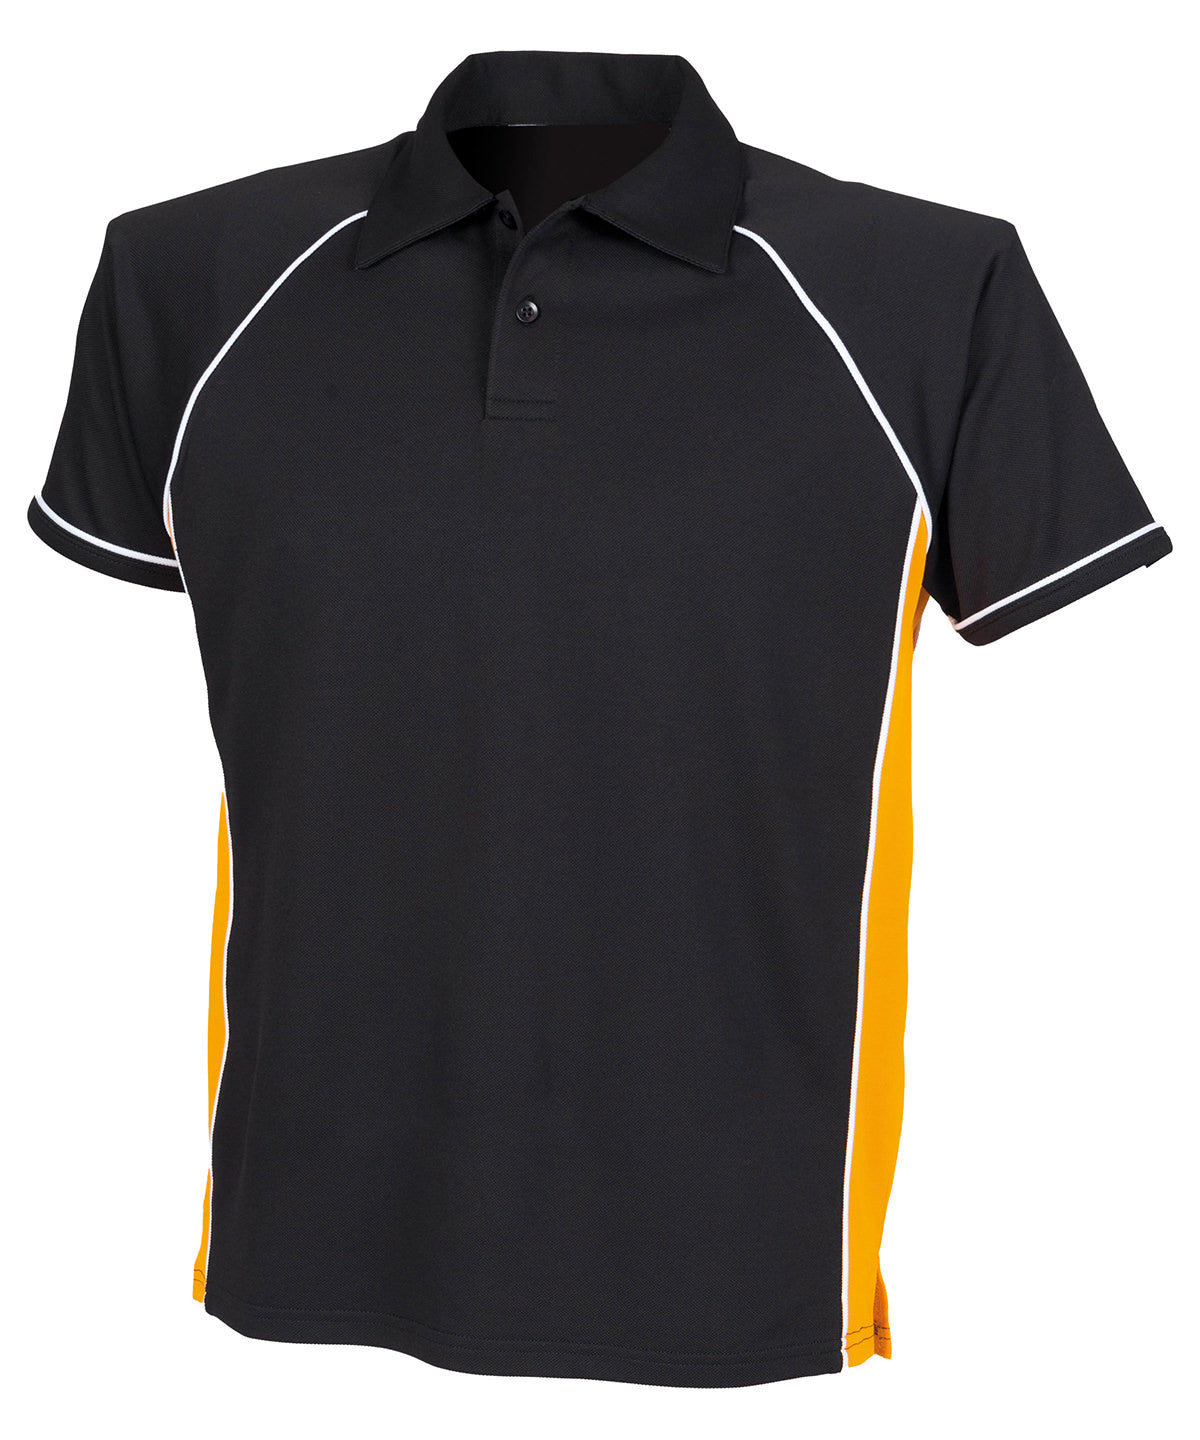 Finden & Hales Kids piped performance polo